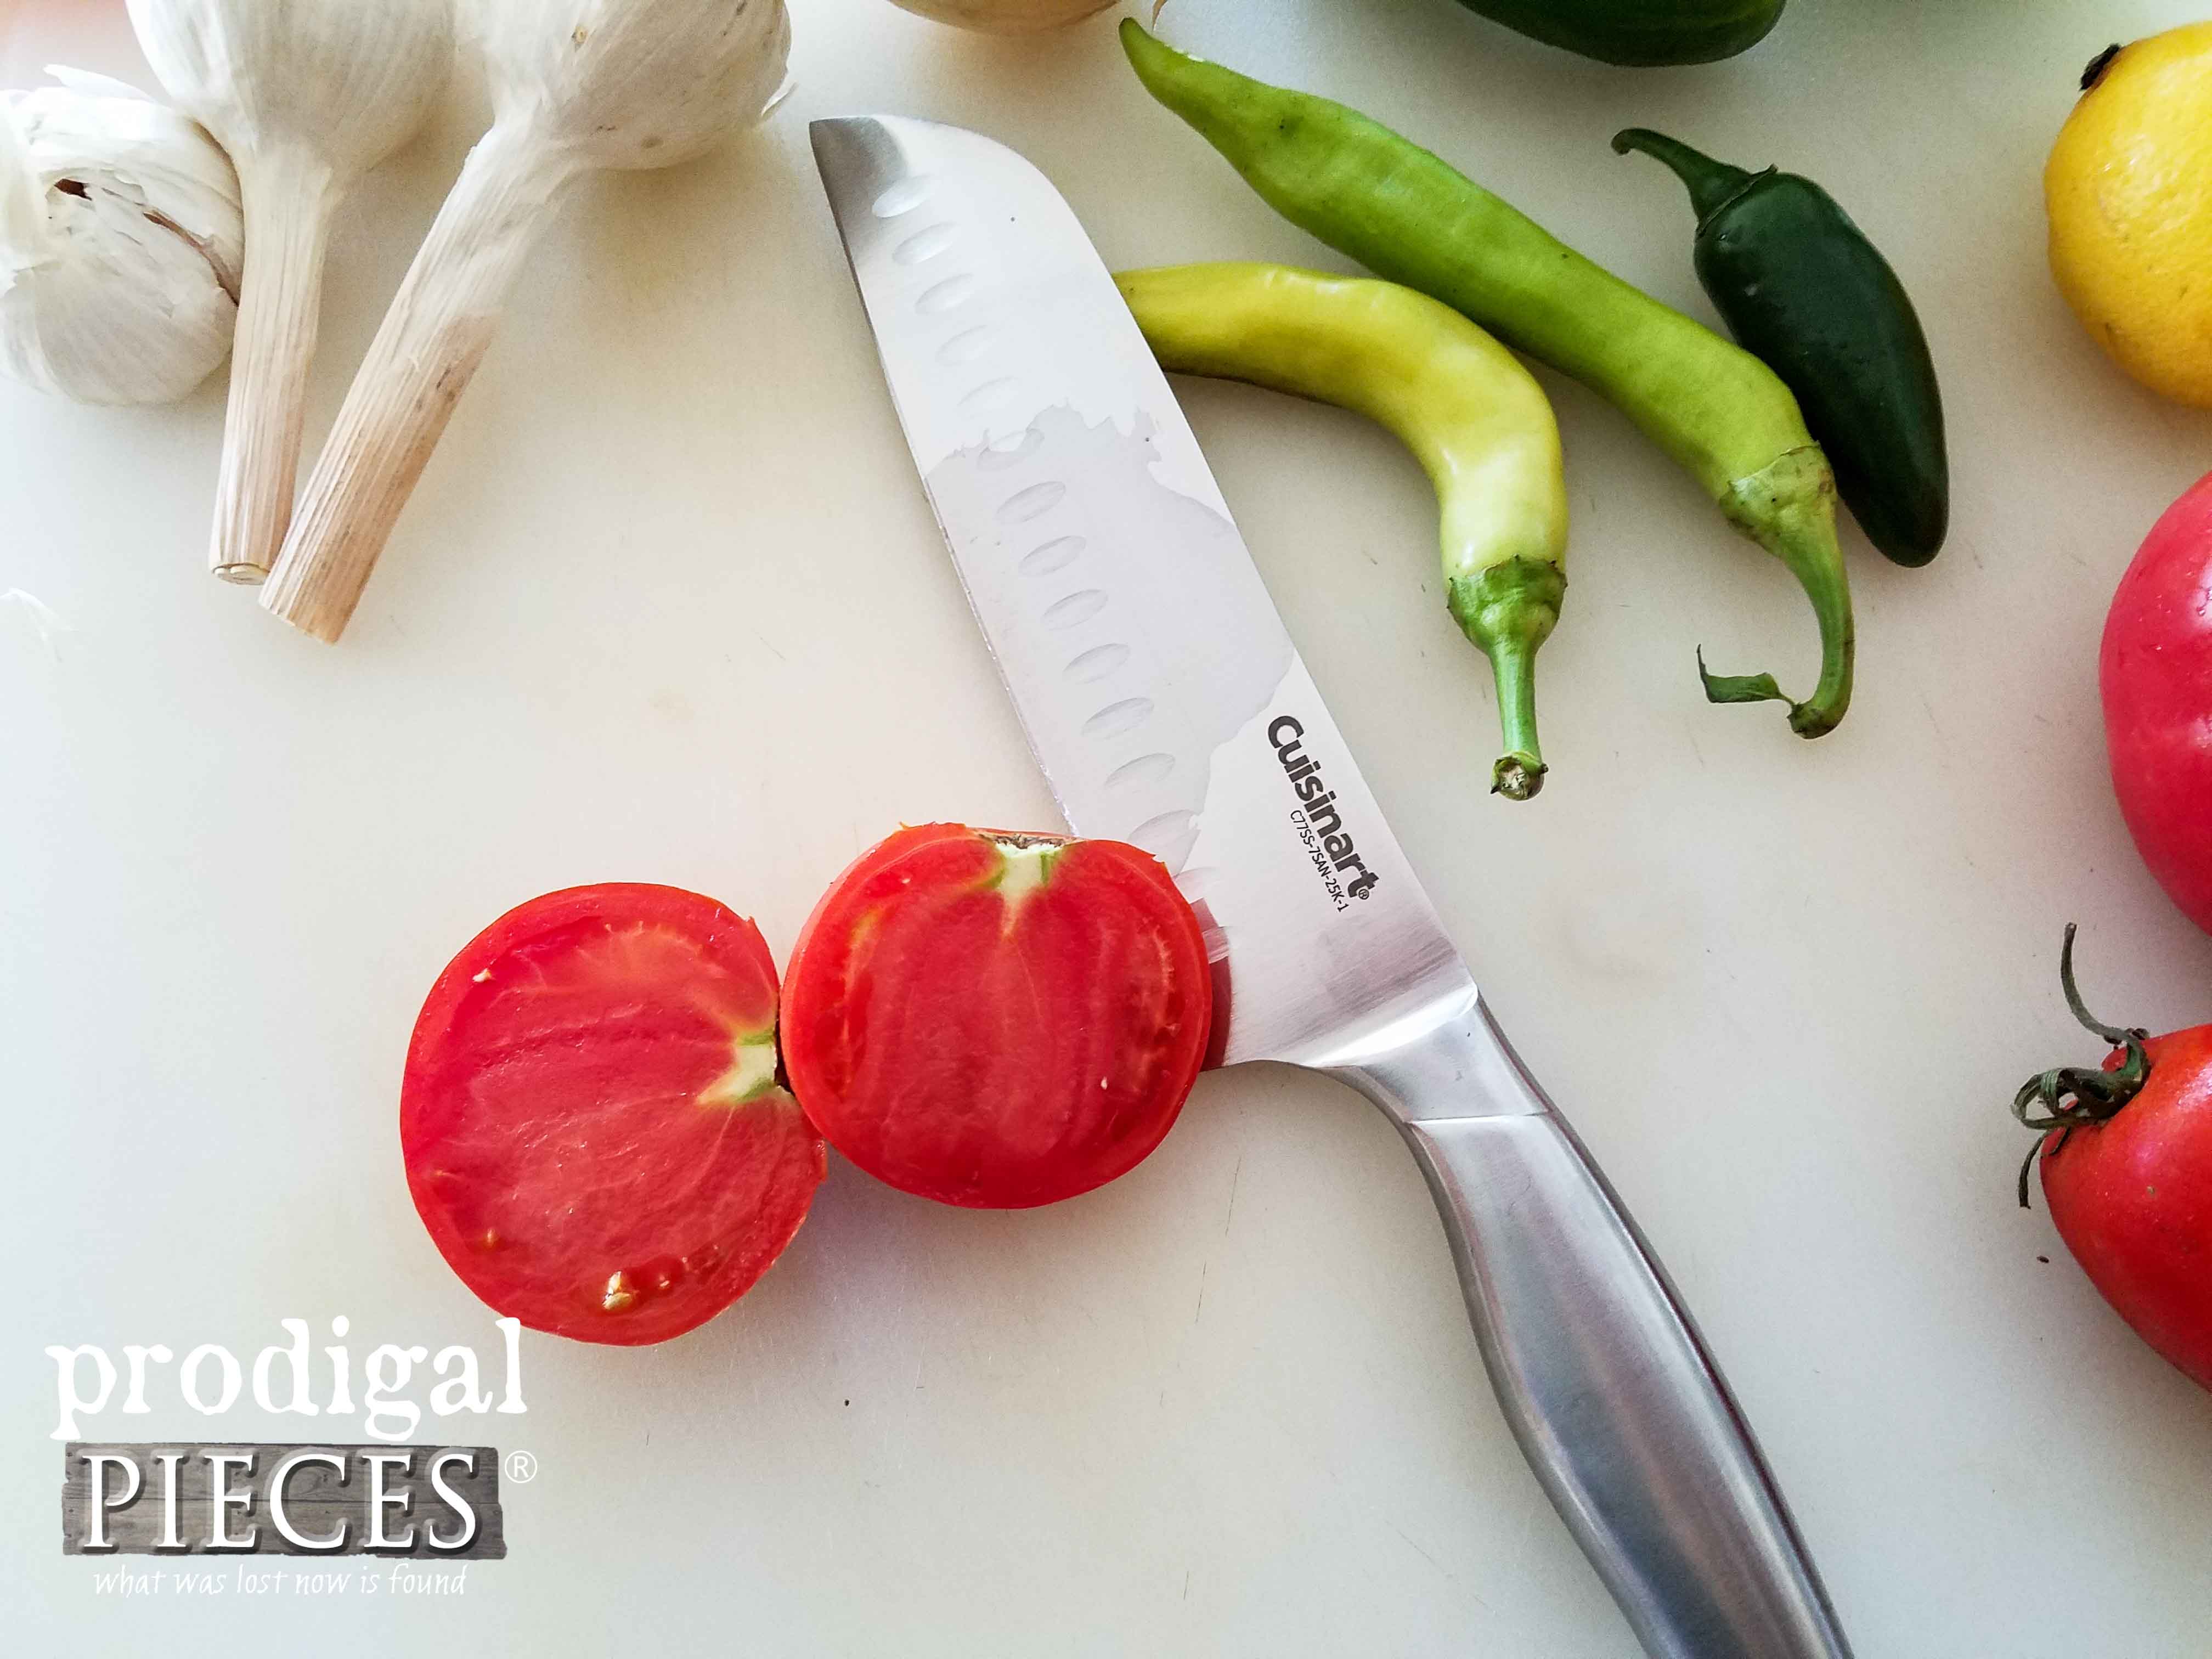 Fresh Cut Tomato Straight from the Garden | Prodigal Pieces | prodigalpieces.com